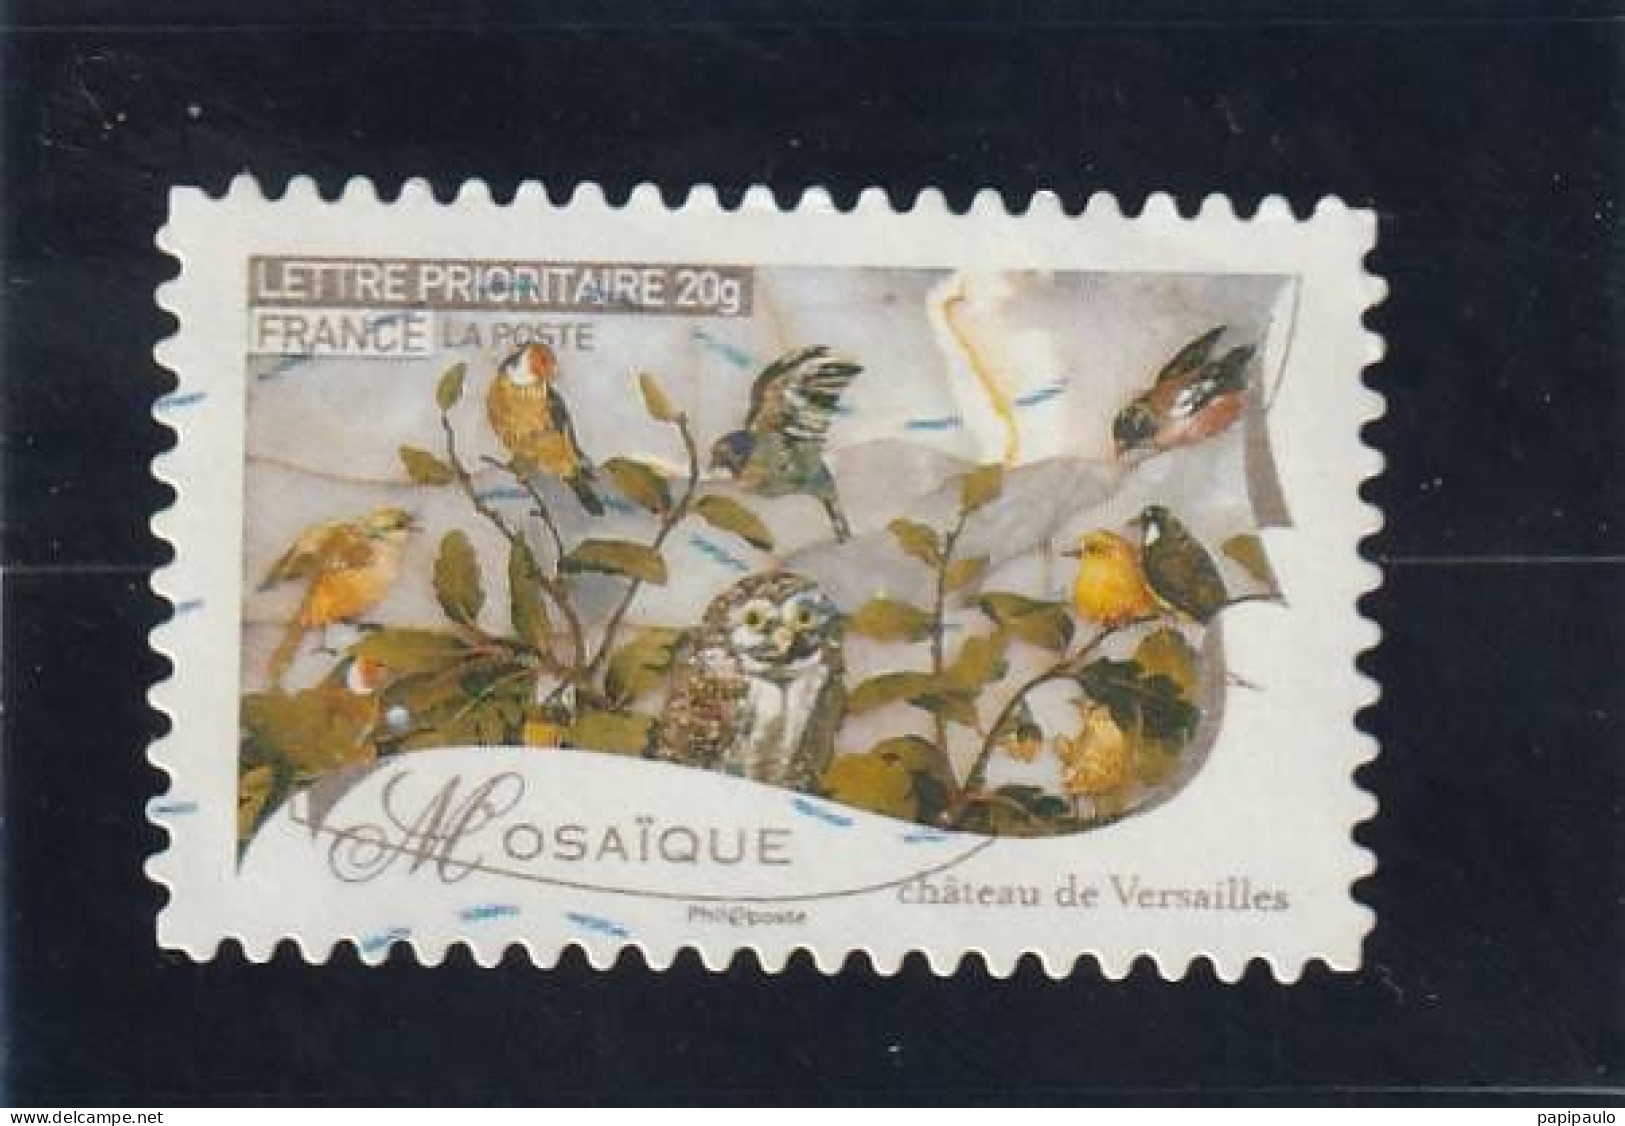 FRANCE 2009  Y&T 260  Lettre Prioritaire 20g - Used Stamps